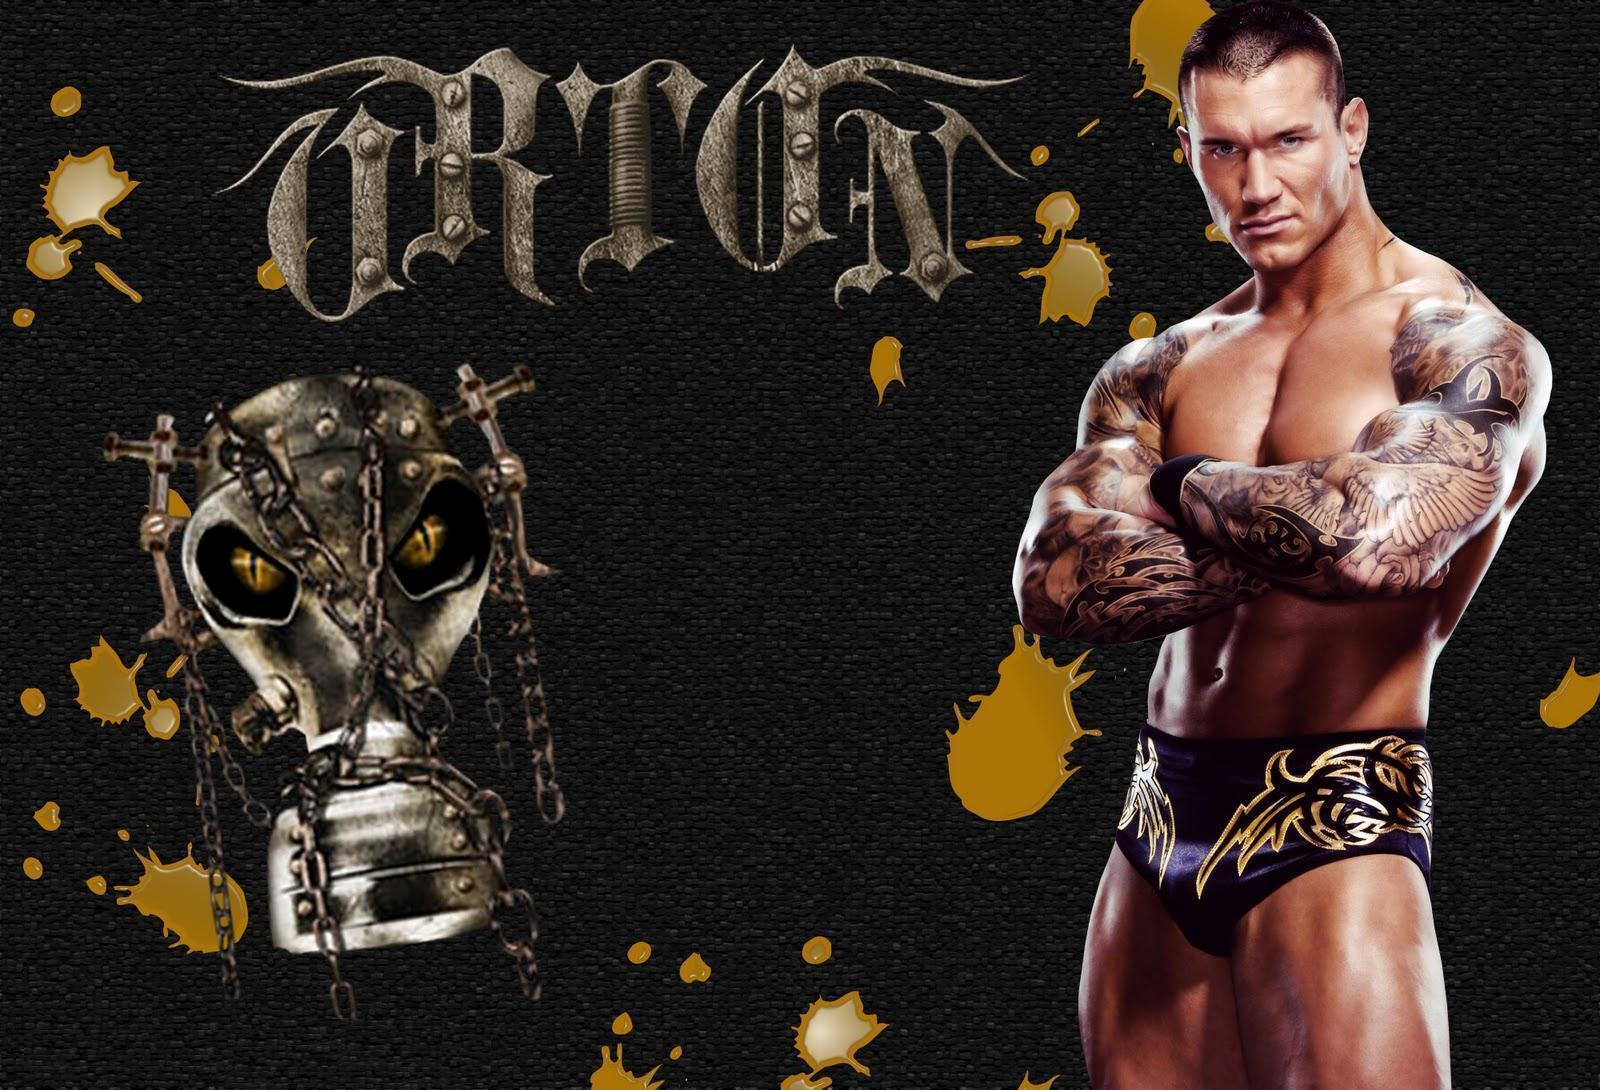 Randy Orton HD Wallpaper Wallpaper Background of Your Choice